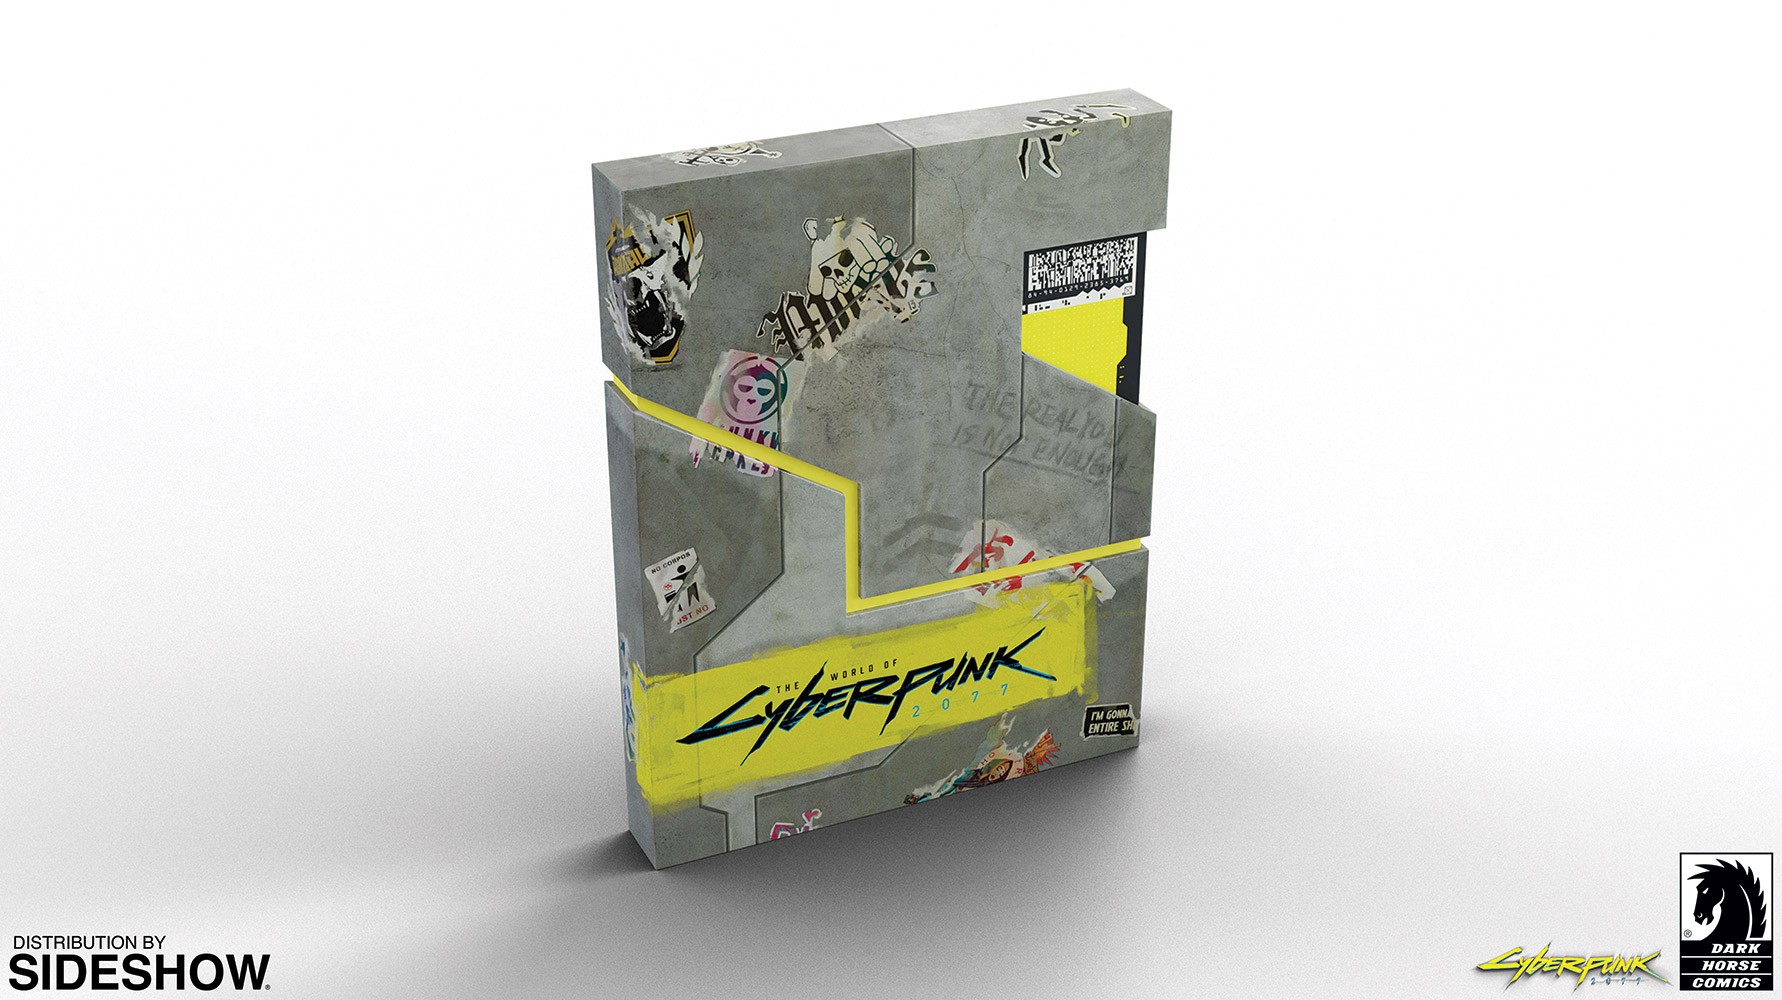 The World of Cyberpunk 2077 (Deluxe Edition) (Prototype Shown) View 2